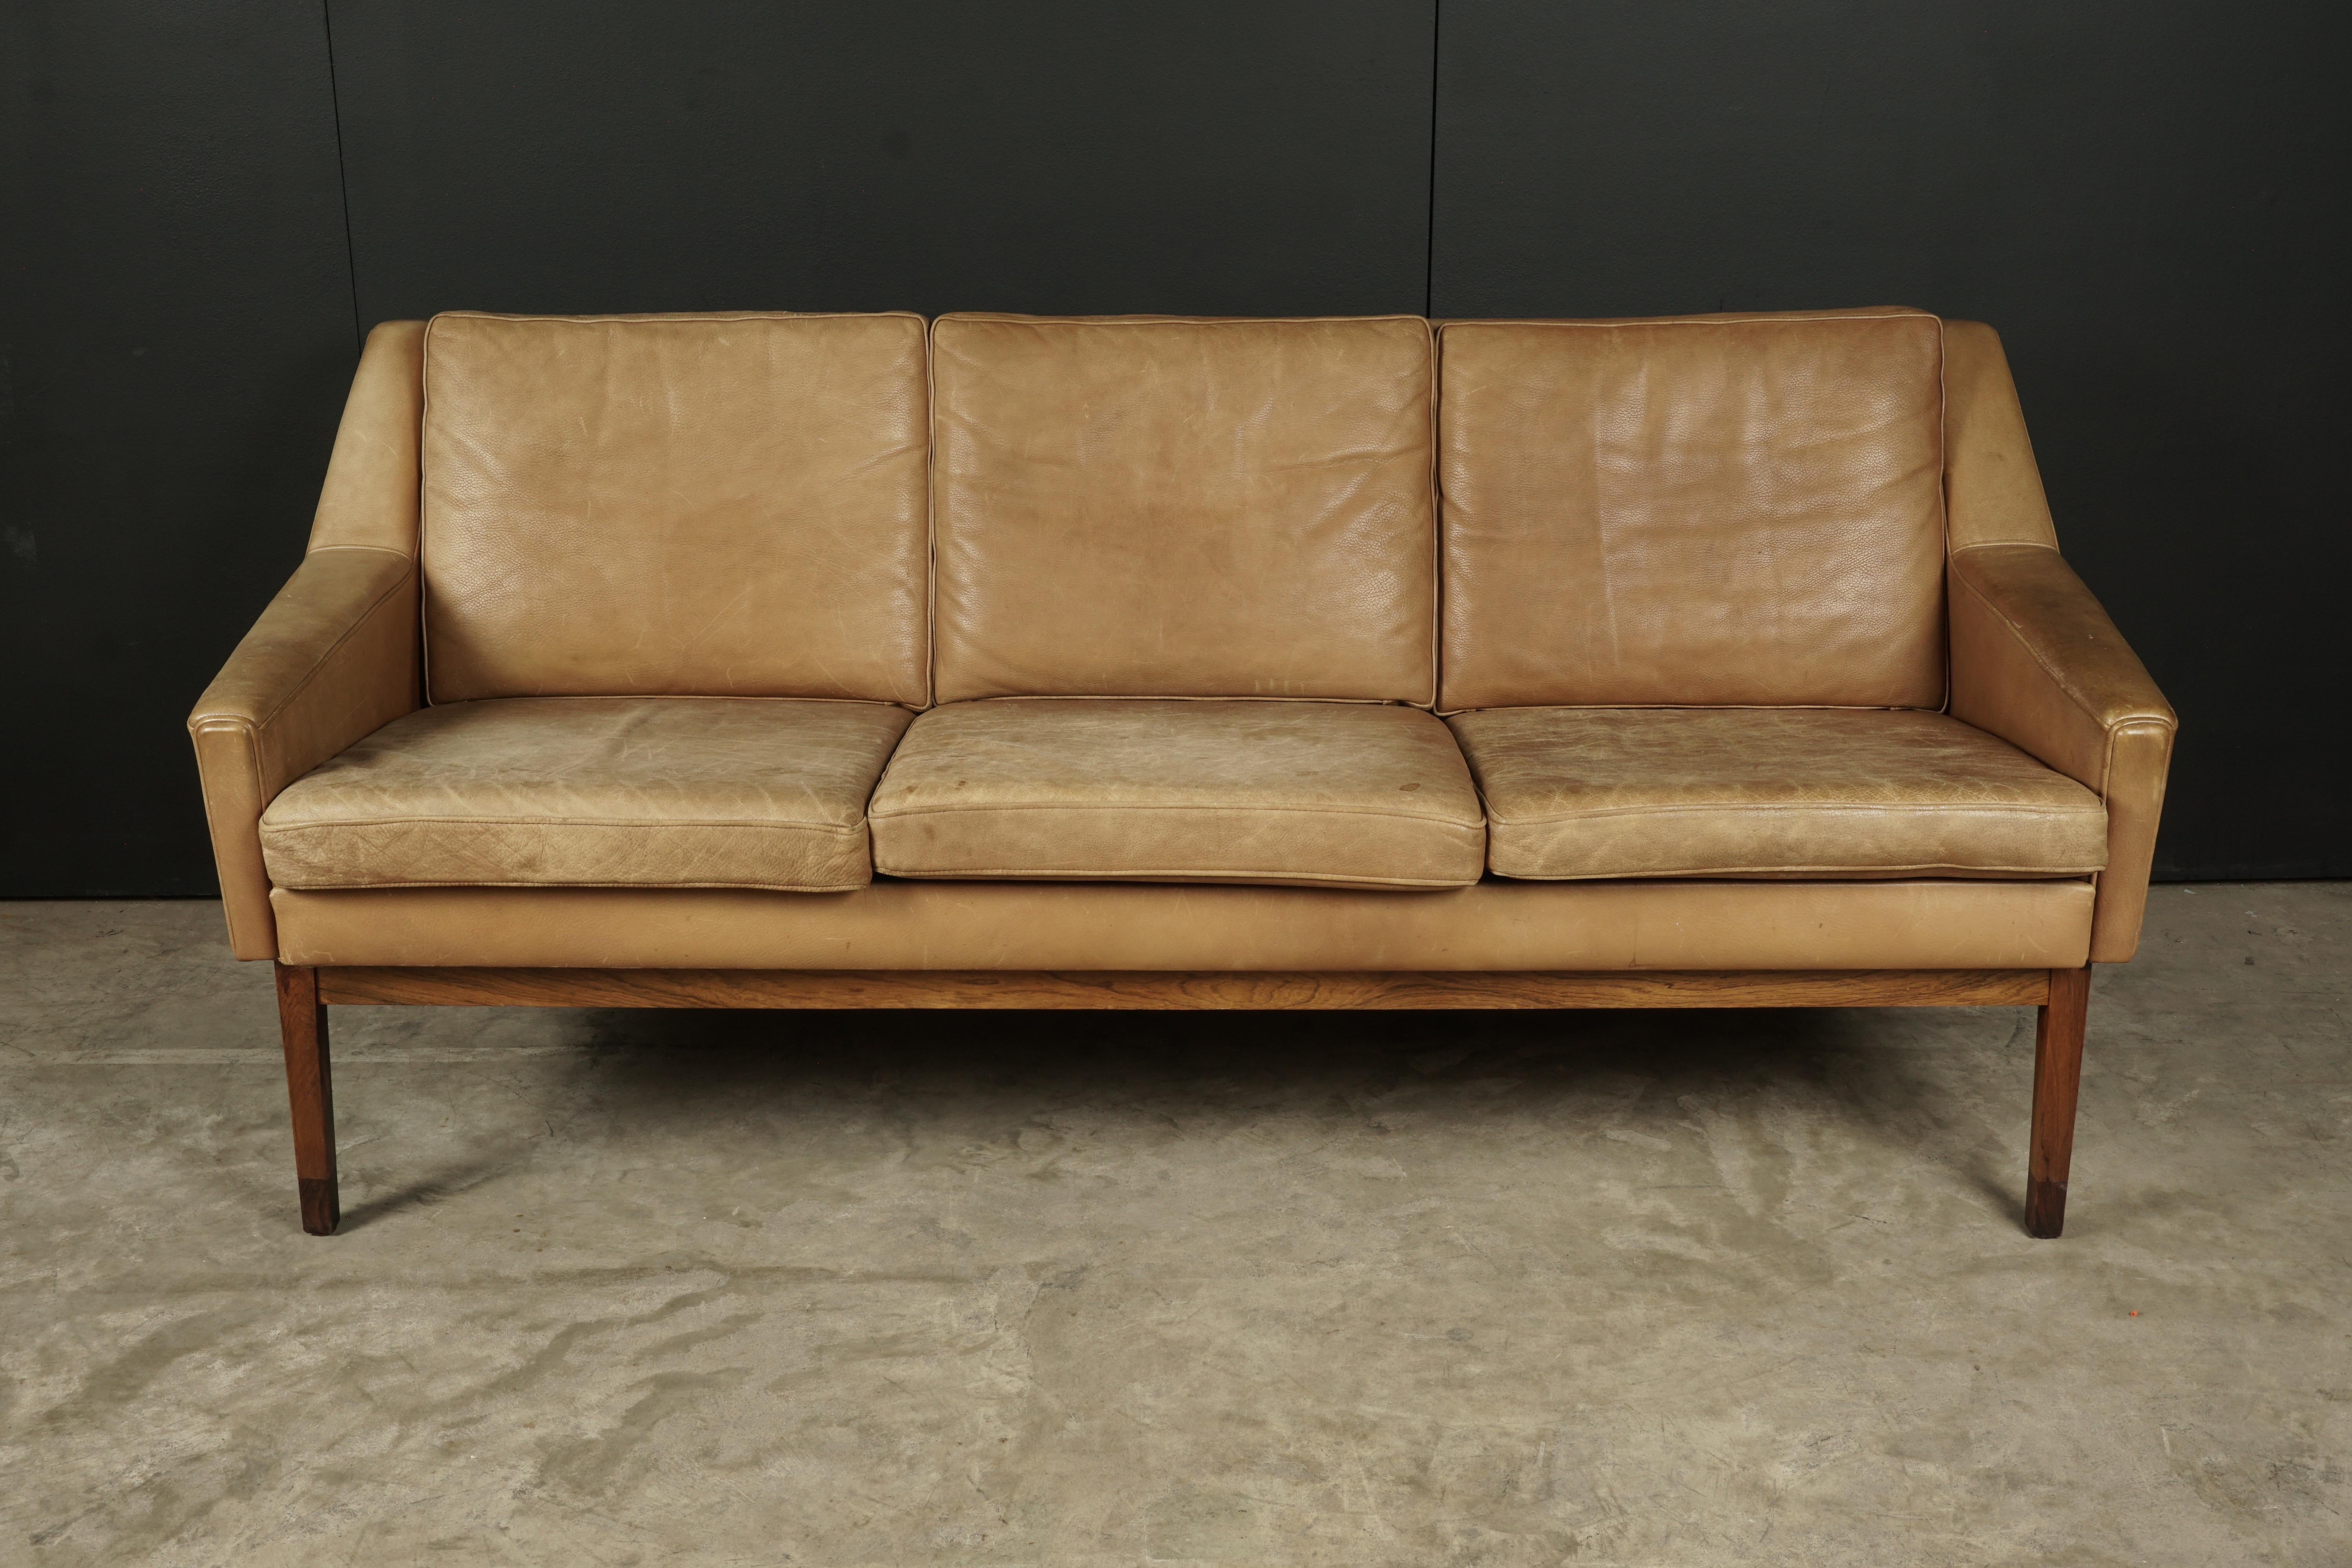 Midcentury leather sofa from Denmark, circa 1970. Original thick tan leather upholstery. Unknown designer. Very good quality and patina.